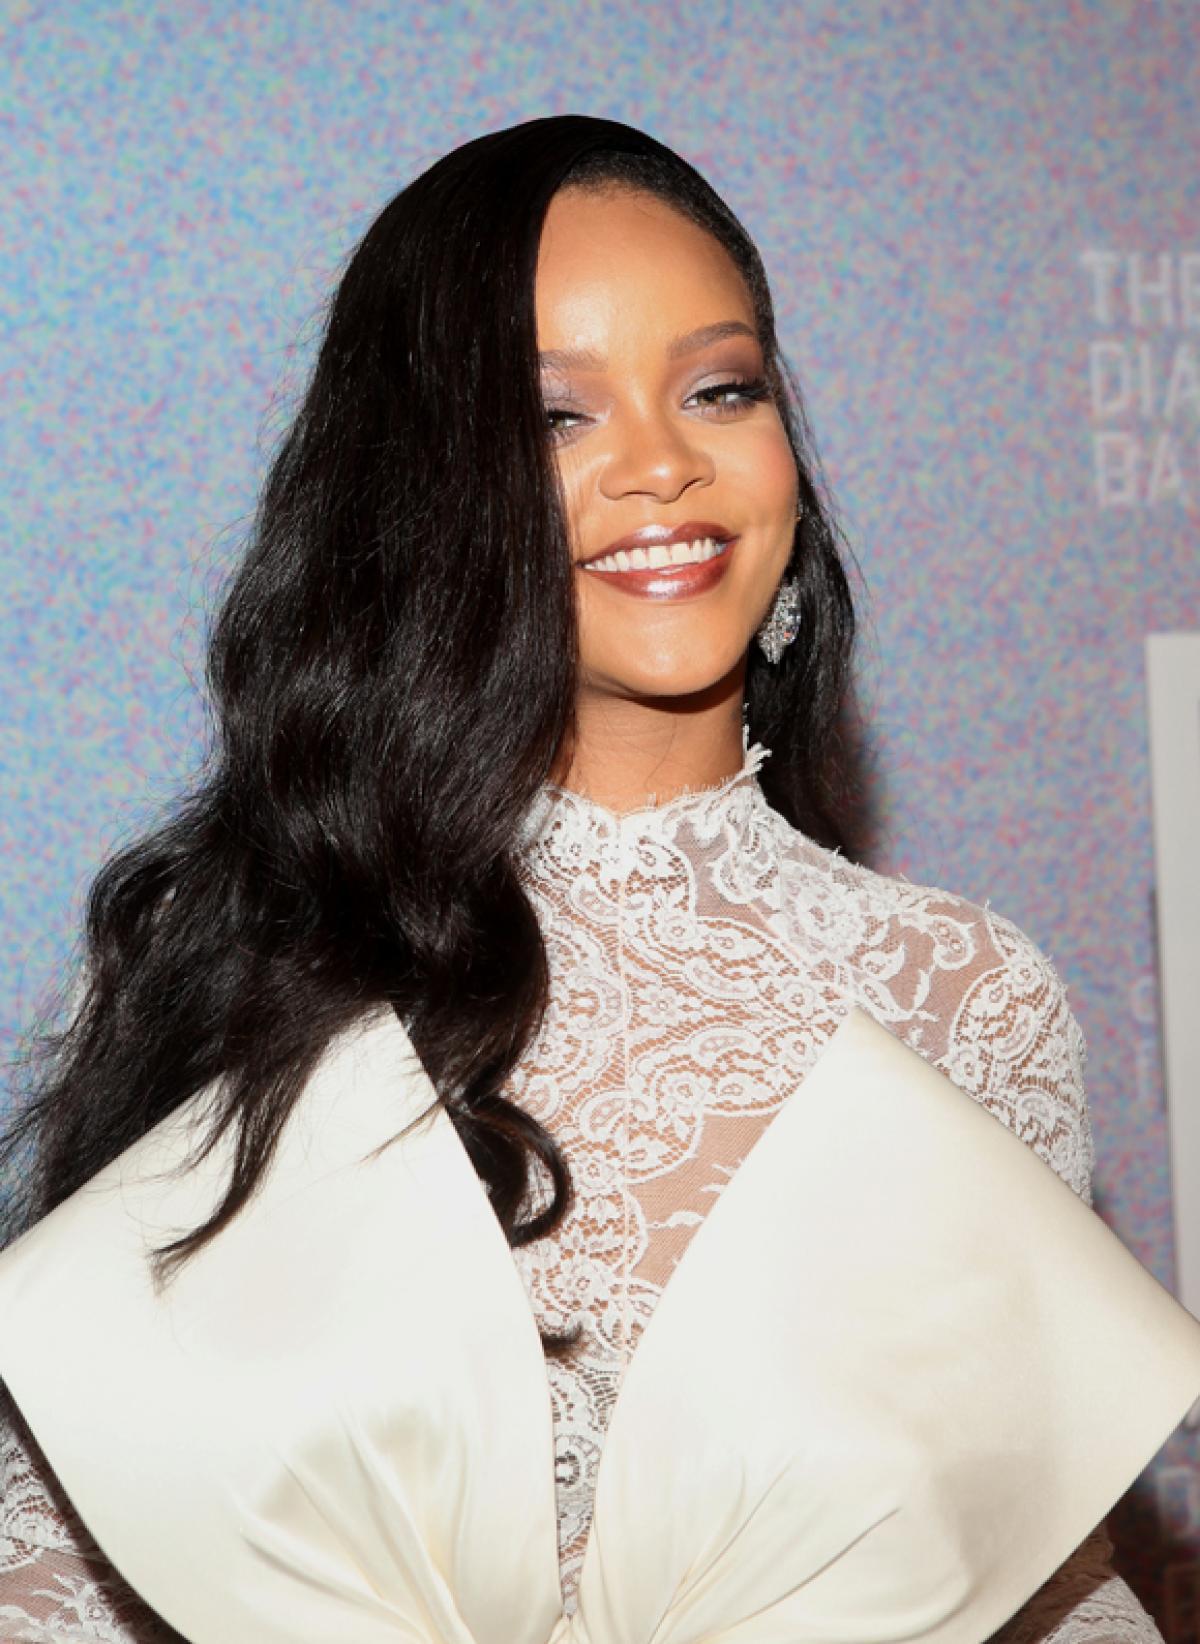 Rihanna to launch her own luxury fashion label: reports